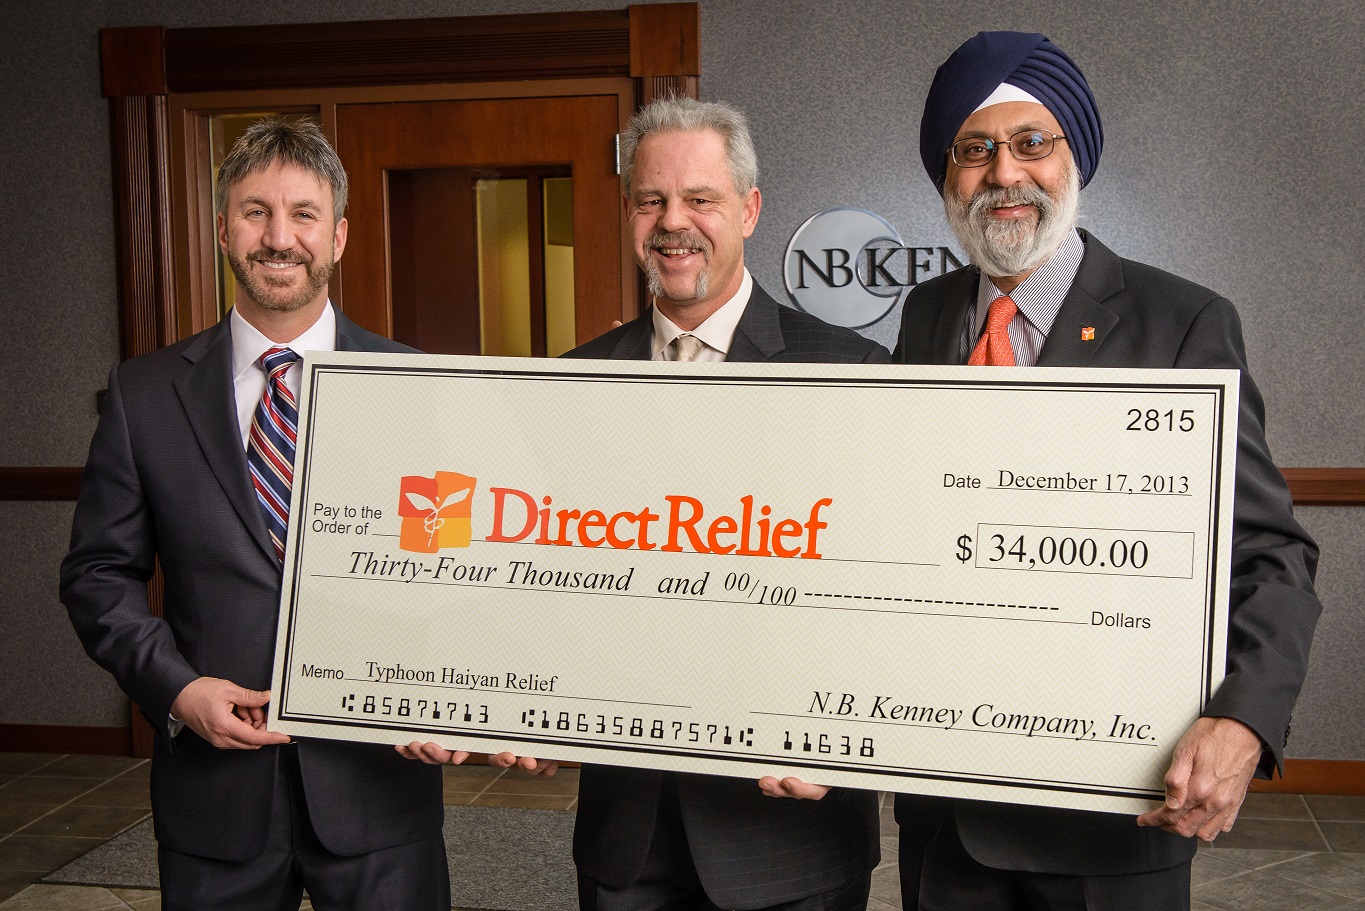 NB Kenney President Steven Kenney (L) and Executive Vice President Robert Nims (Center) present a $34,000 donation to Bhupi Singh (R), CFO/COO of Direct Relief